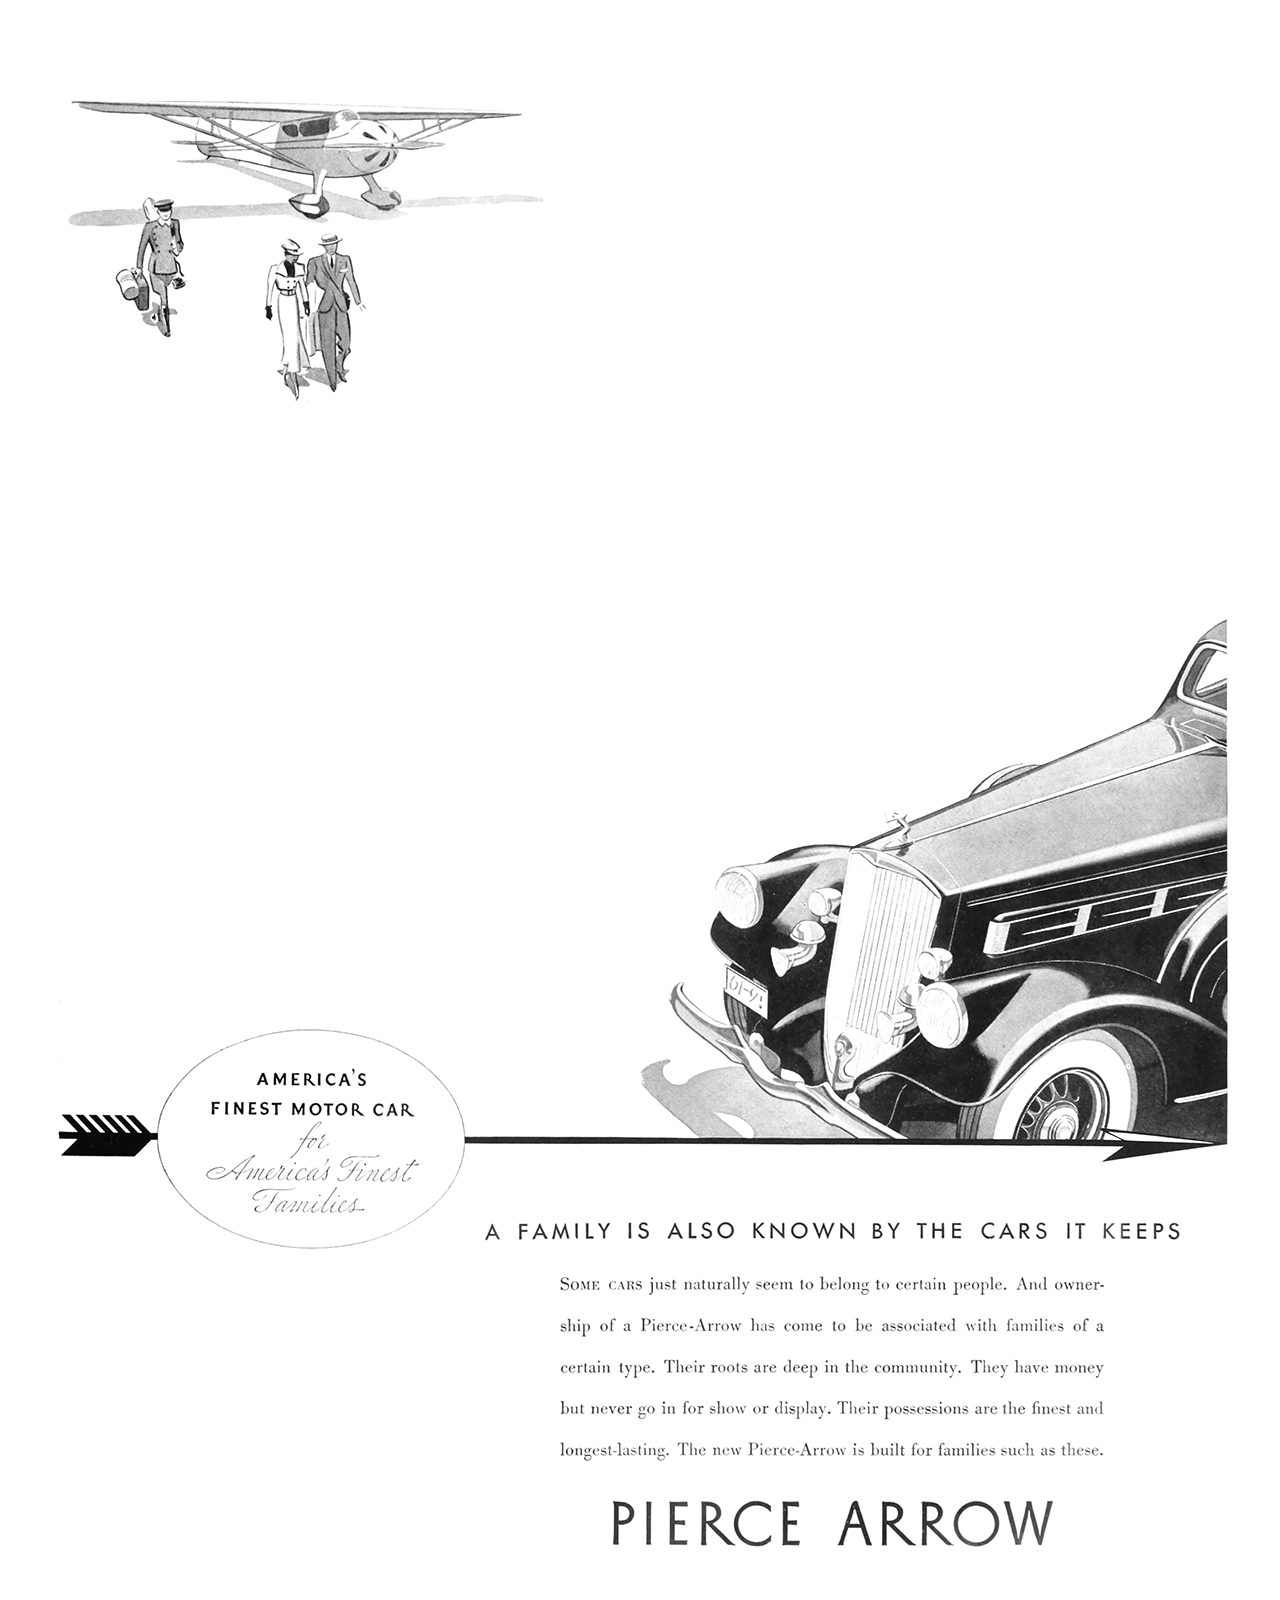 Pierce-Arrow Ad (May, 1935) – A Family Is Also Known by The Cars It Keeps